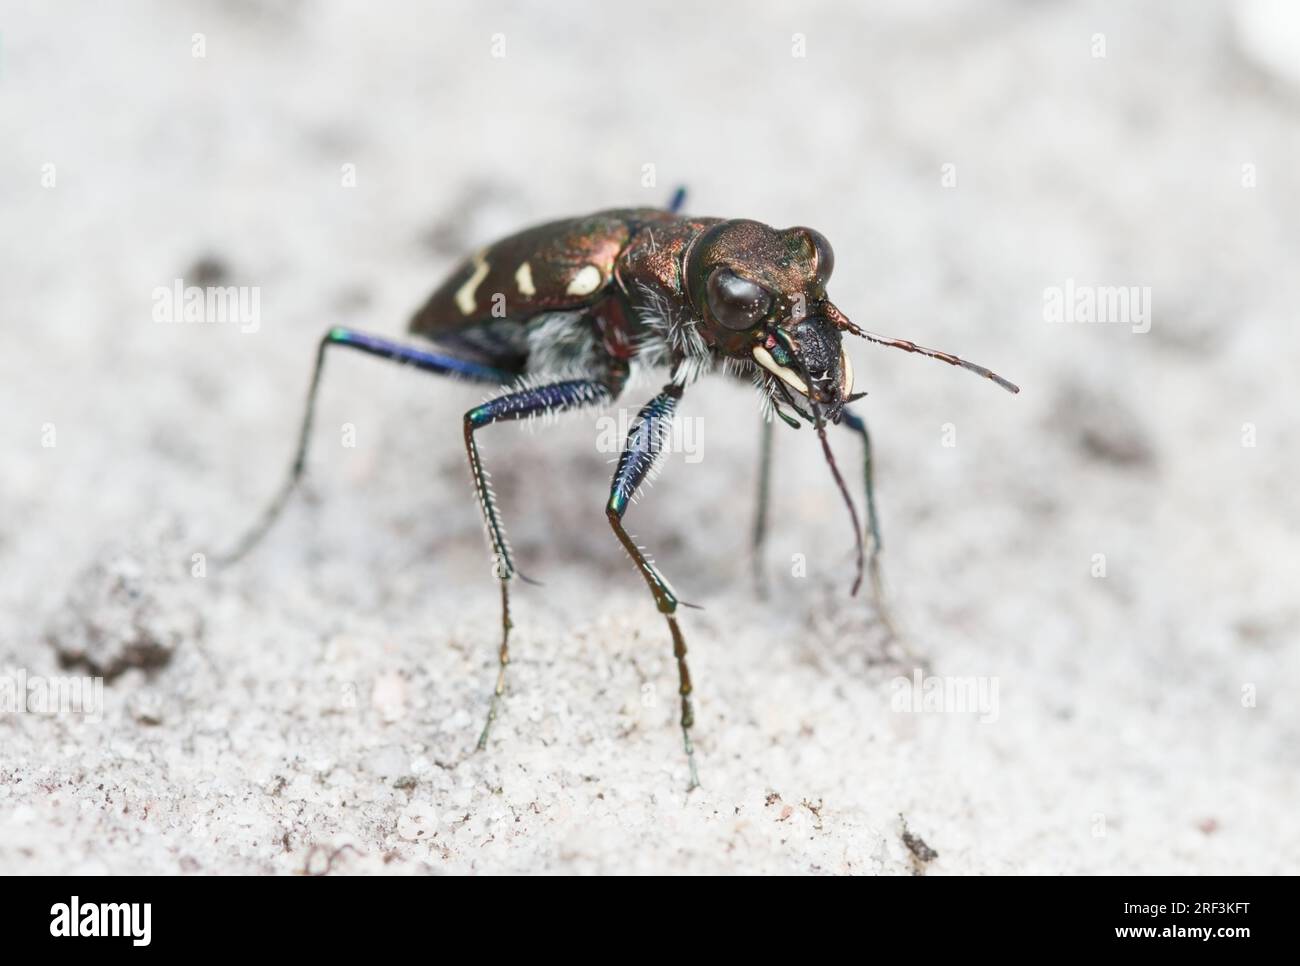 View From Above Of A Wood Or Heath Tiger Beetle, Cicindela sylvatica, Standing Upright On Sandy Heathland, New Forest UK Stock Photo